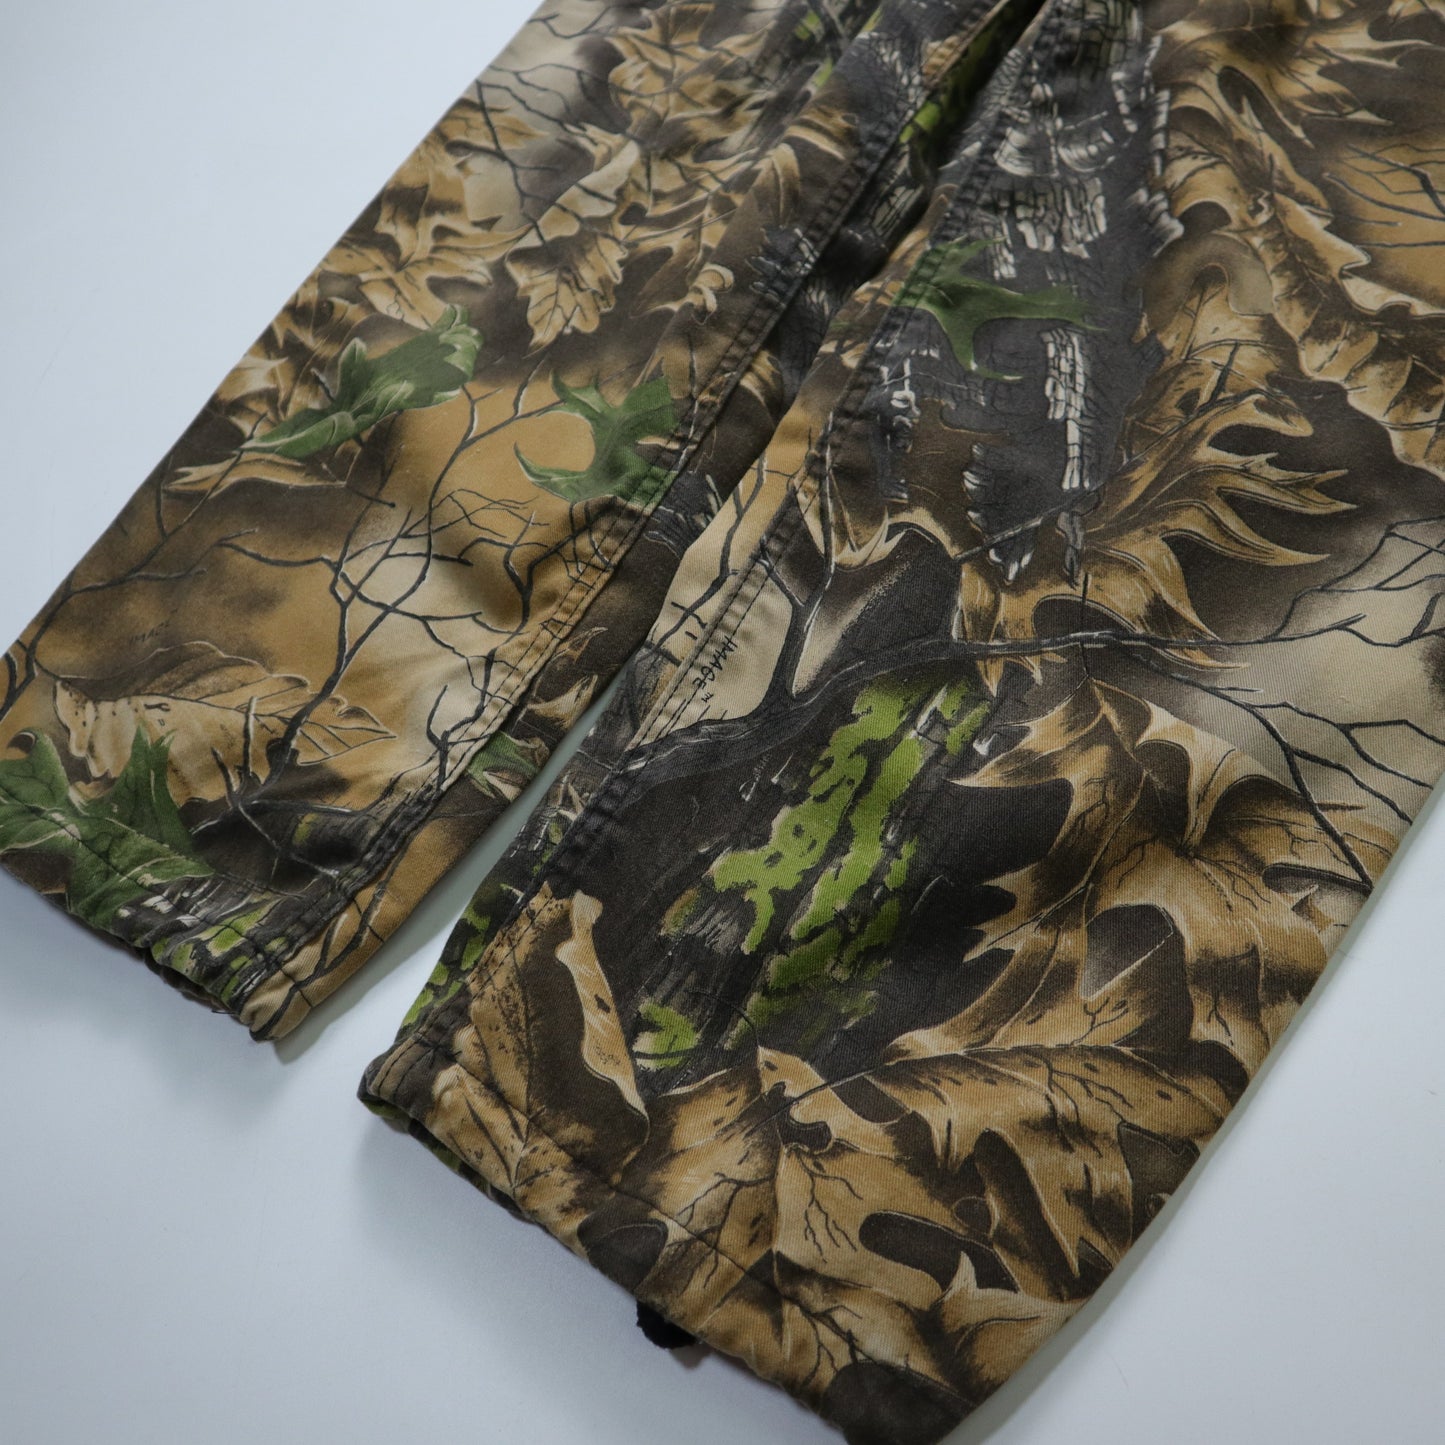 (30-37W) 90s American-made Hunt Safe jungle camouflage maple leaf hunting pants